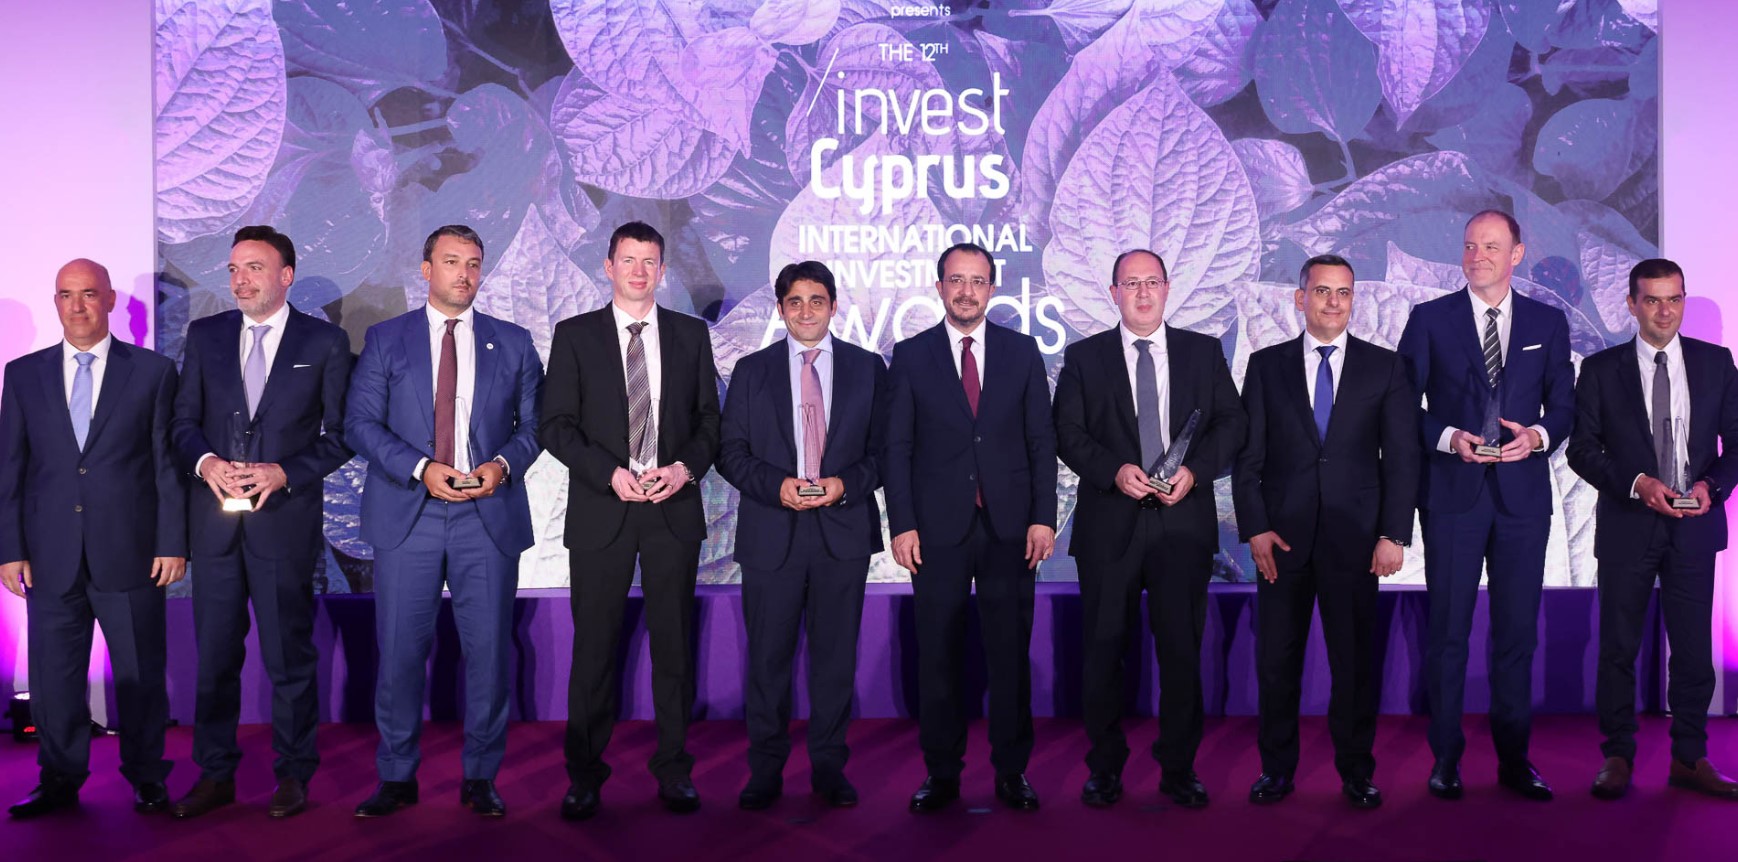 President praises foreign investors for their contributions to Cyprus’ economic growth (updated)